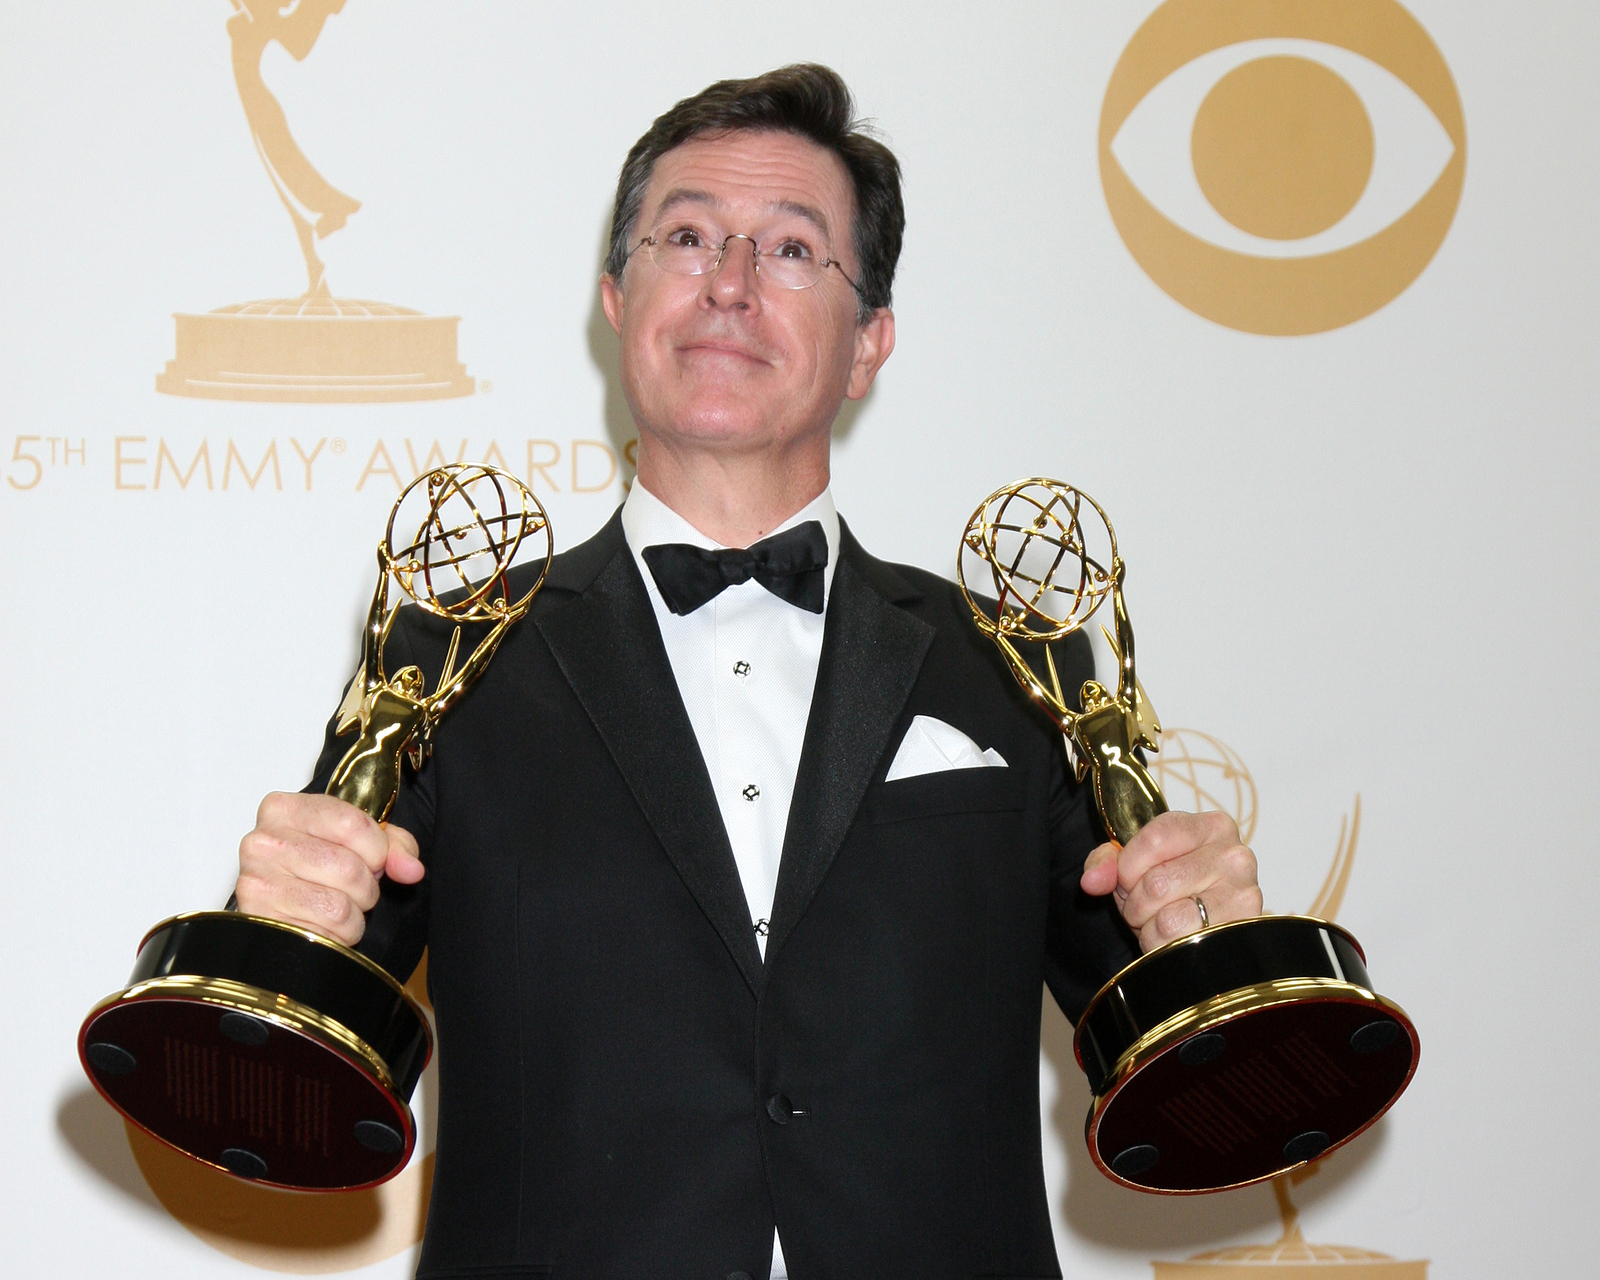 Stephen Colbert with Emmy Awards